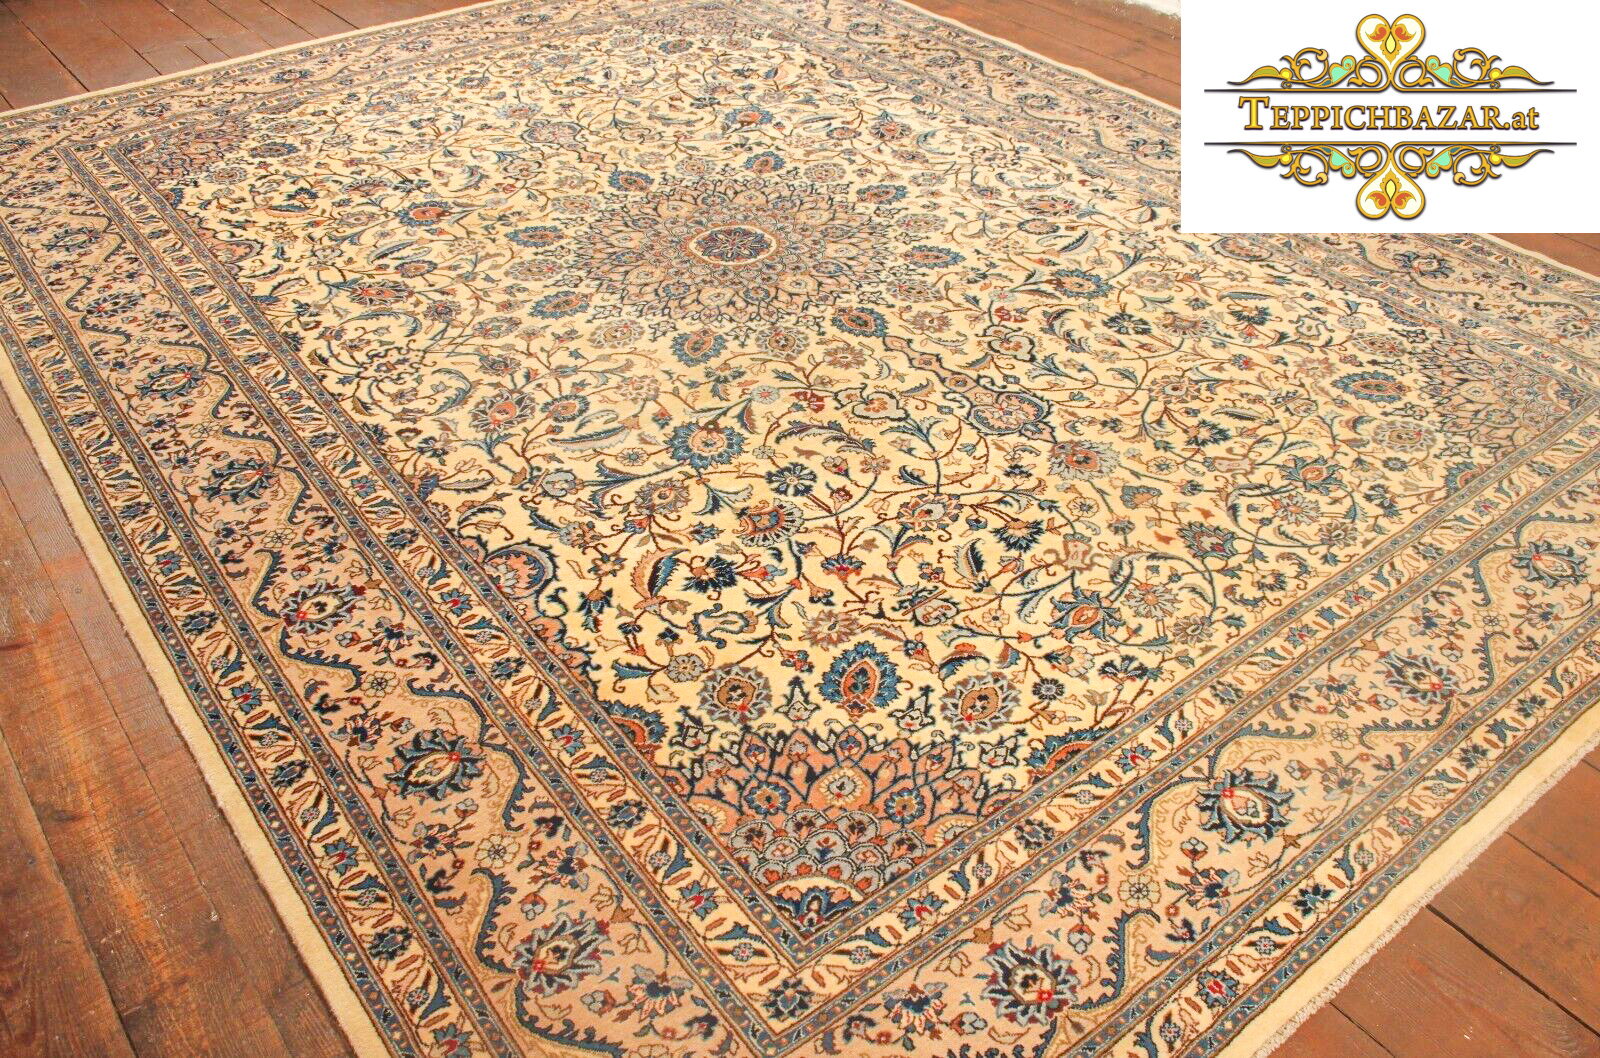 (#H1322) APPROX. 392X298CM HAND-KNOTTED PERSIAN RUG PERSIAN RUG,,WOOL,ORIENTAL RUG,CARPET BAZAR,CARPET,RUGS,PATTERNS,BRICKLER,ORIENTAL RUG TYPE: PERSIAN RUG WITH SIGNATURE PILE: 100% WOOL WITHOUT ADDITIONS WARP: 100% COTTON SIZE: 392 298X160.000CM NODE COUNT: APPROX. XNUMX KNOTS PER M² CONDITION: VERY GOOD, WITH MINIMAL PATINA PERSIAN CARPET ORIENTAL CARPET